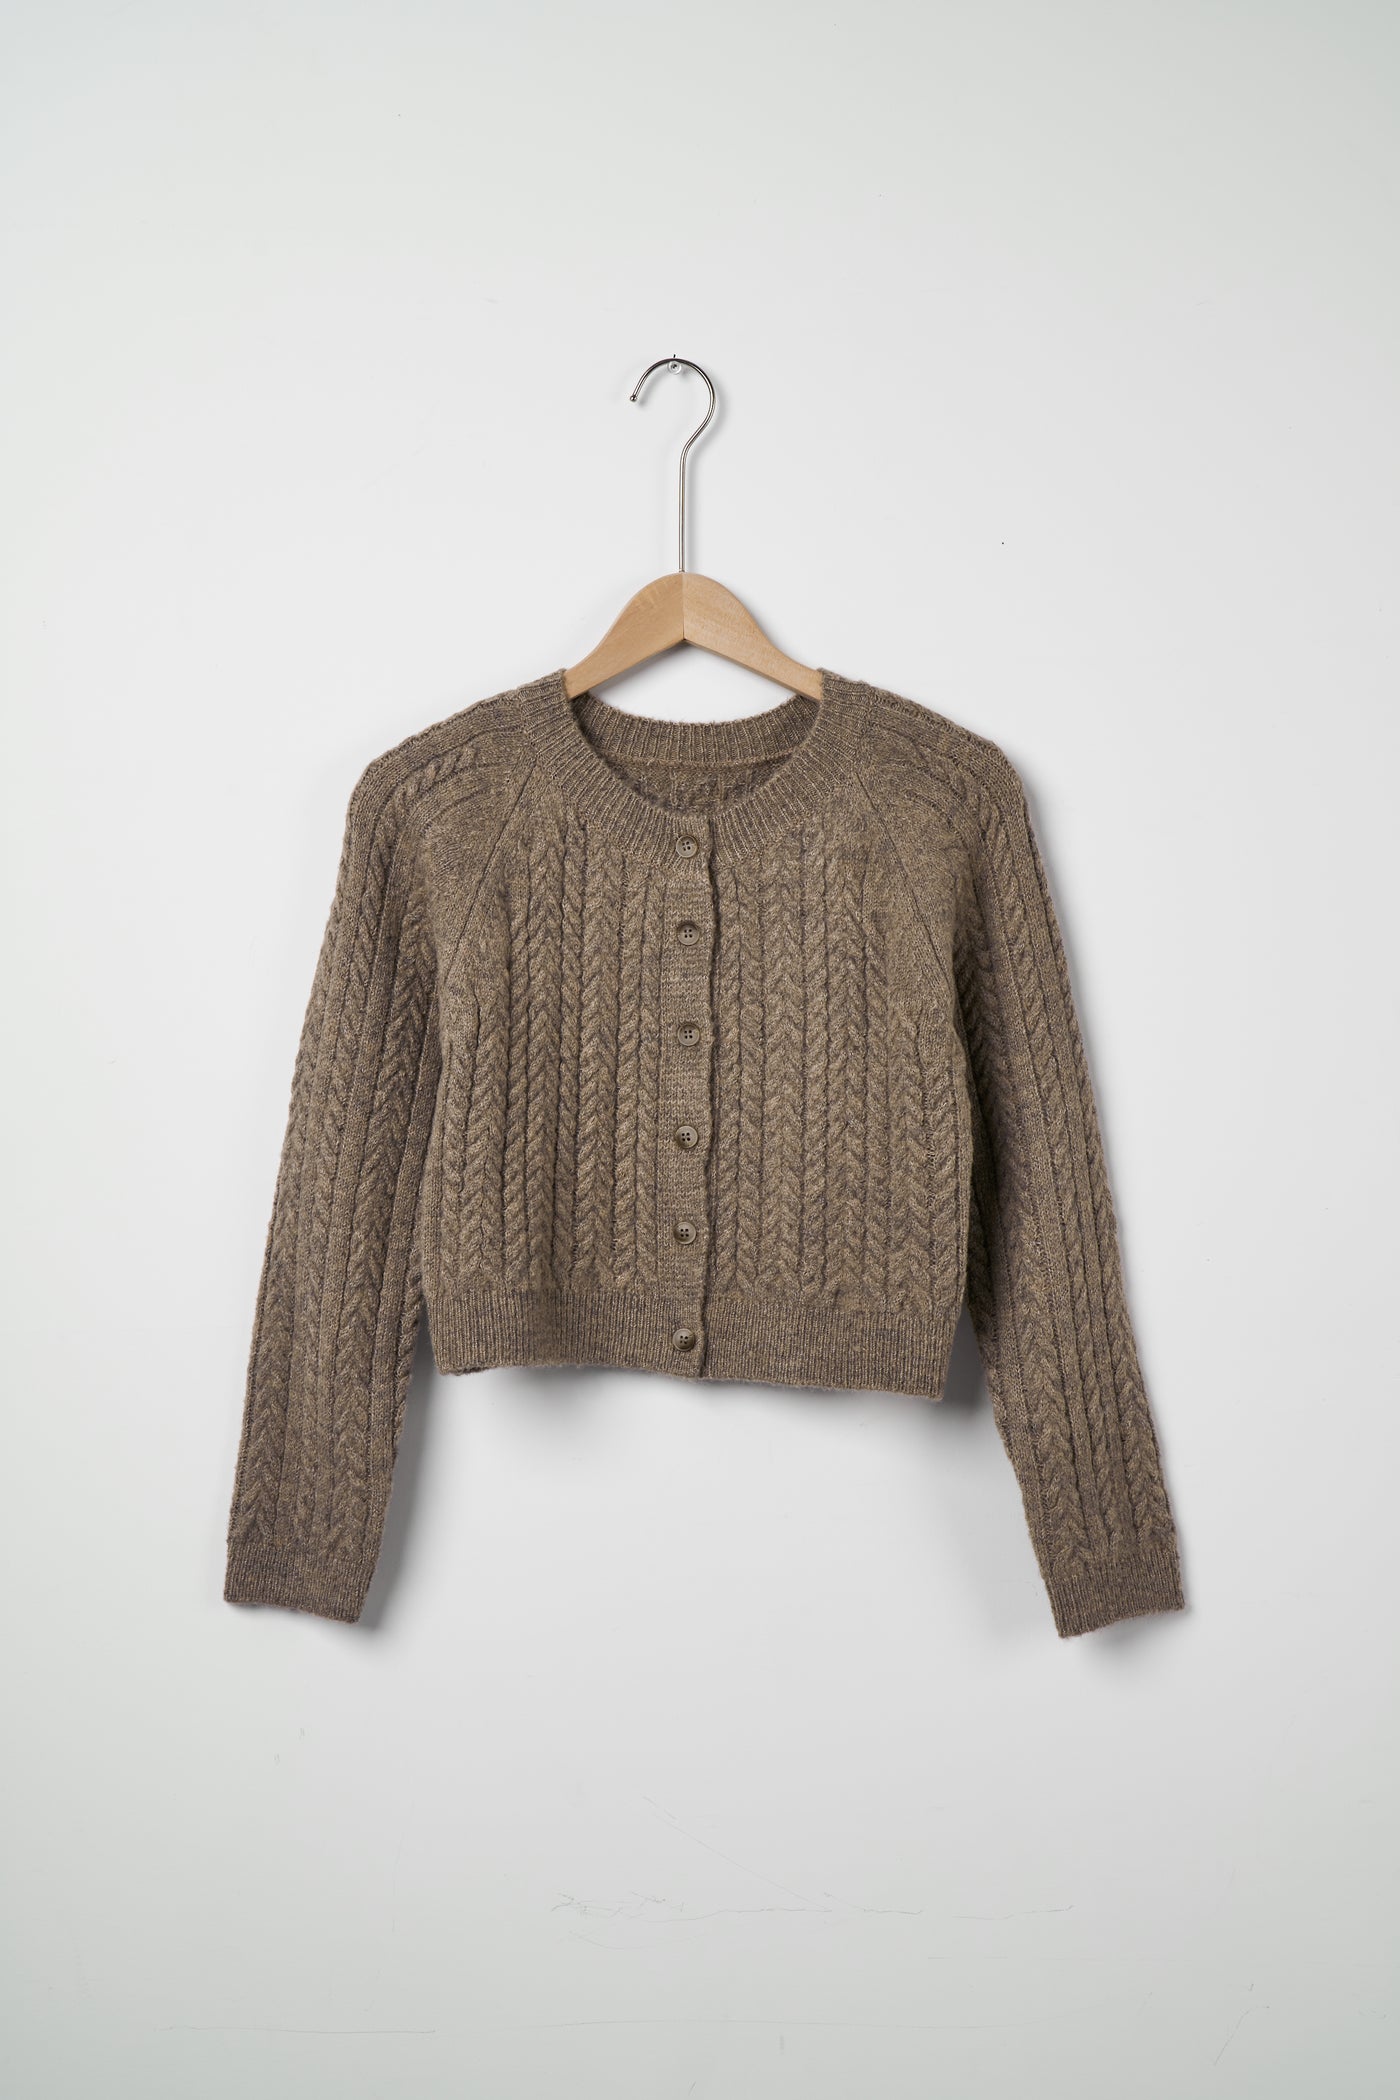 storets.com Ellie Cable Knitted Cardigan